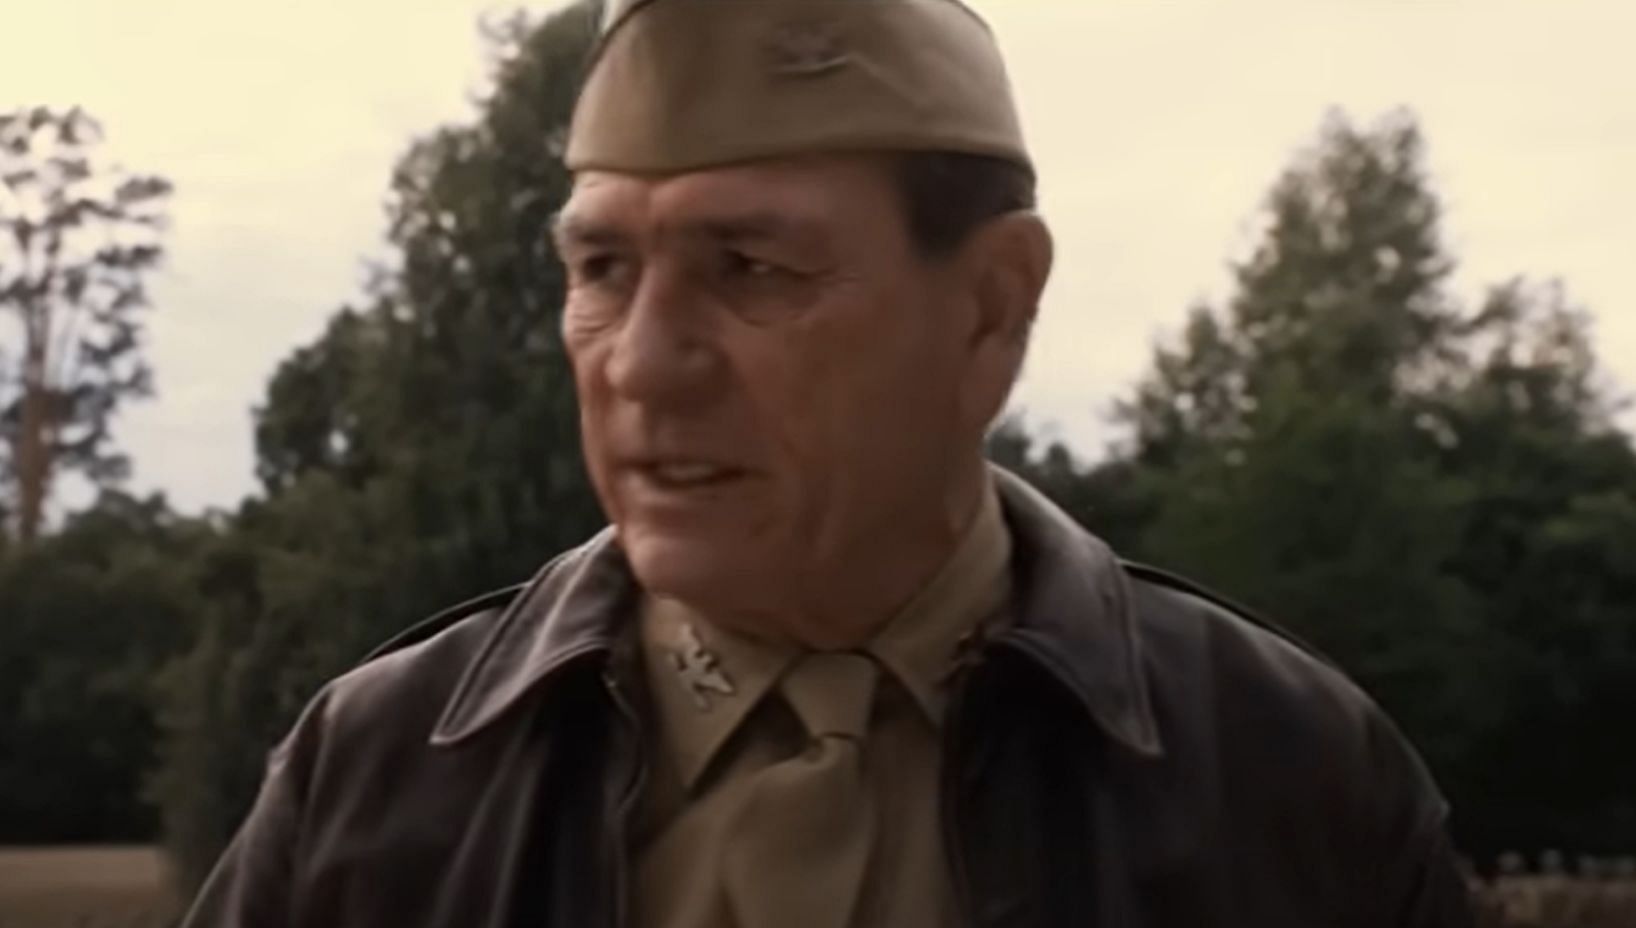 Tommy Lee Jones played Col. Phillips for Captain America (Image via Marvel)